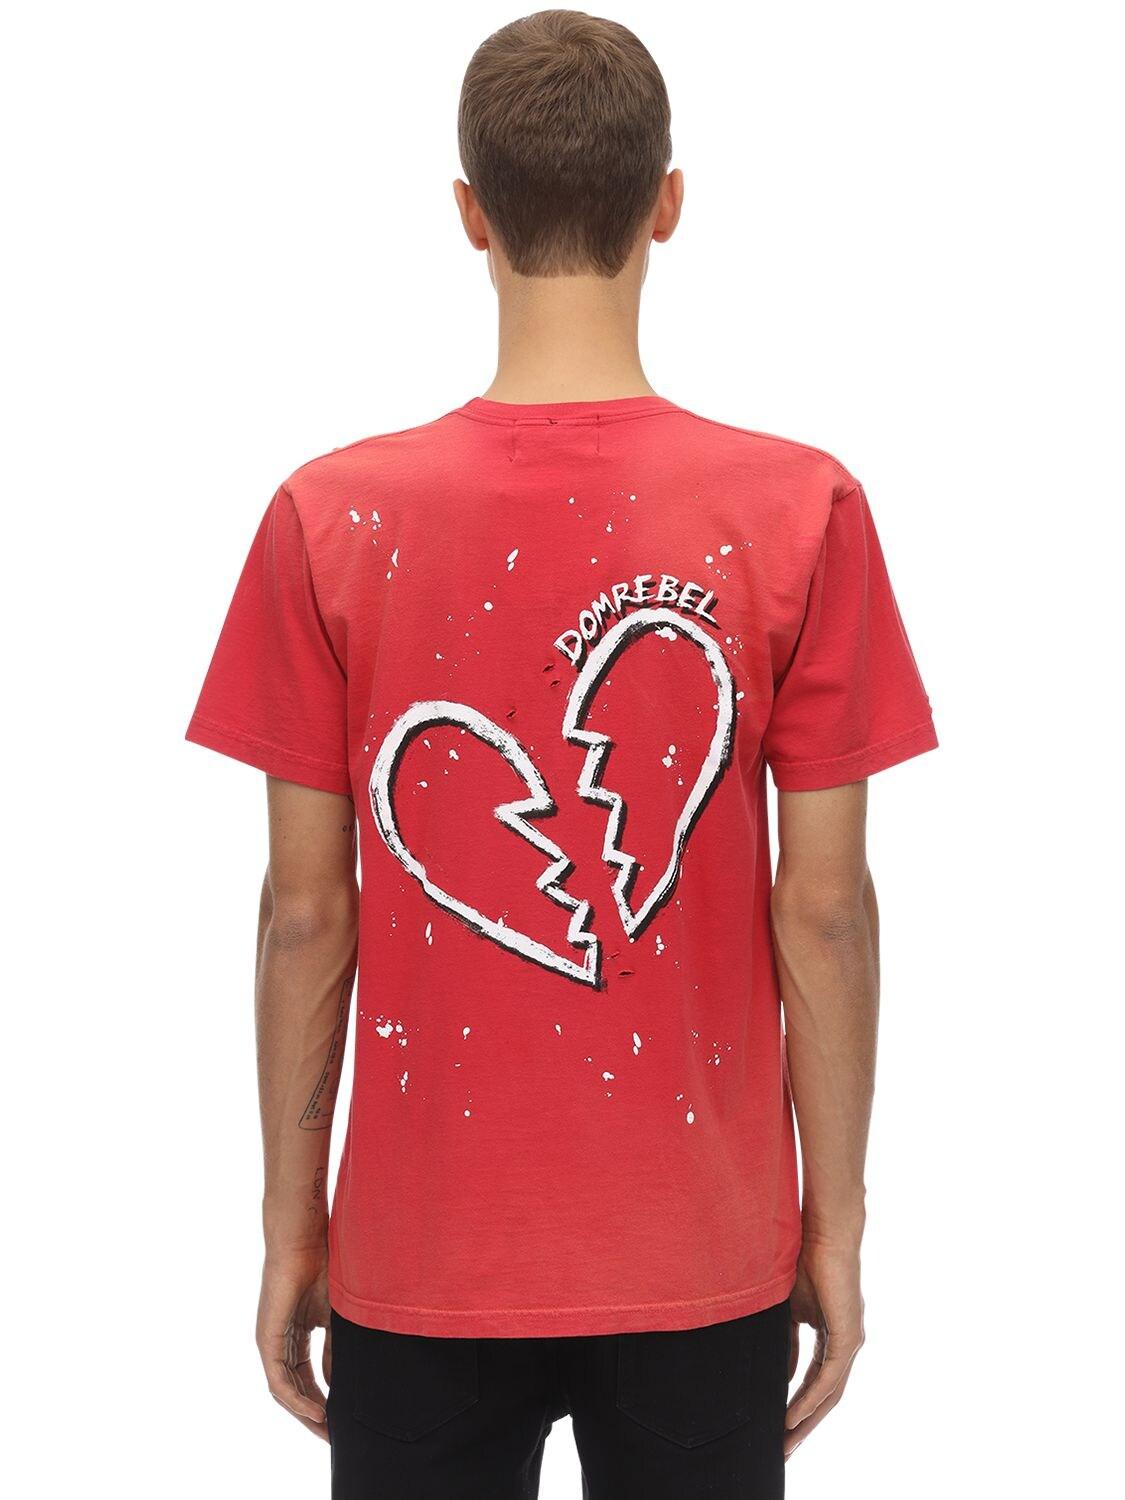 DOMREBEL L'amour Destroyed Cotton Jersey T-shirt in Red for Men - Lyst